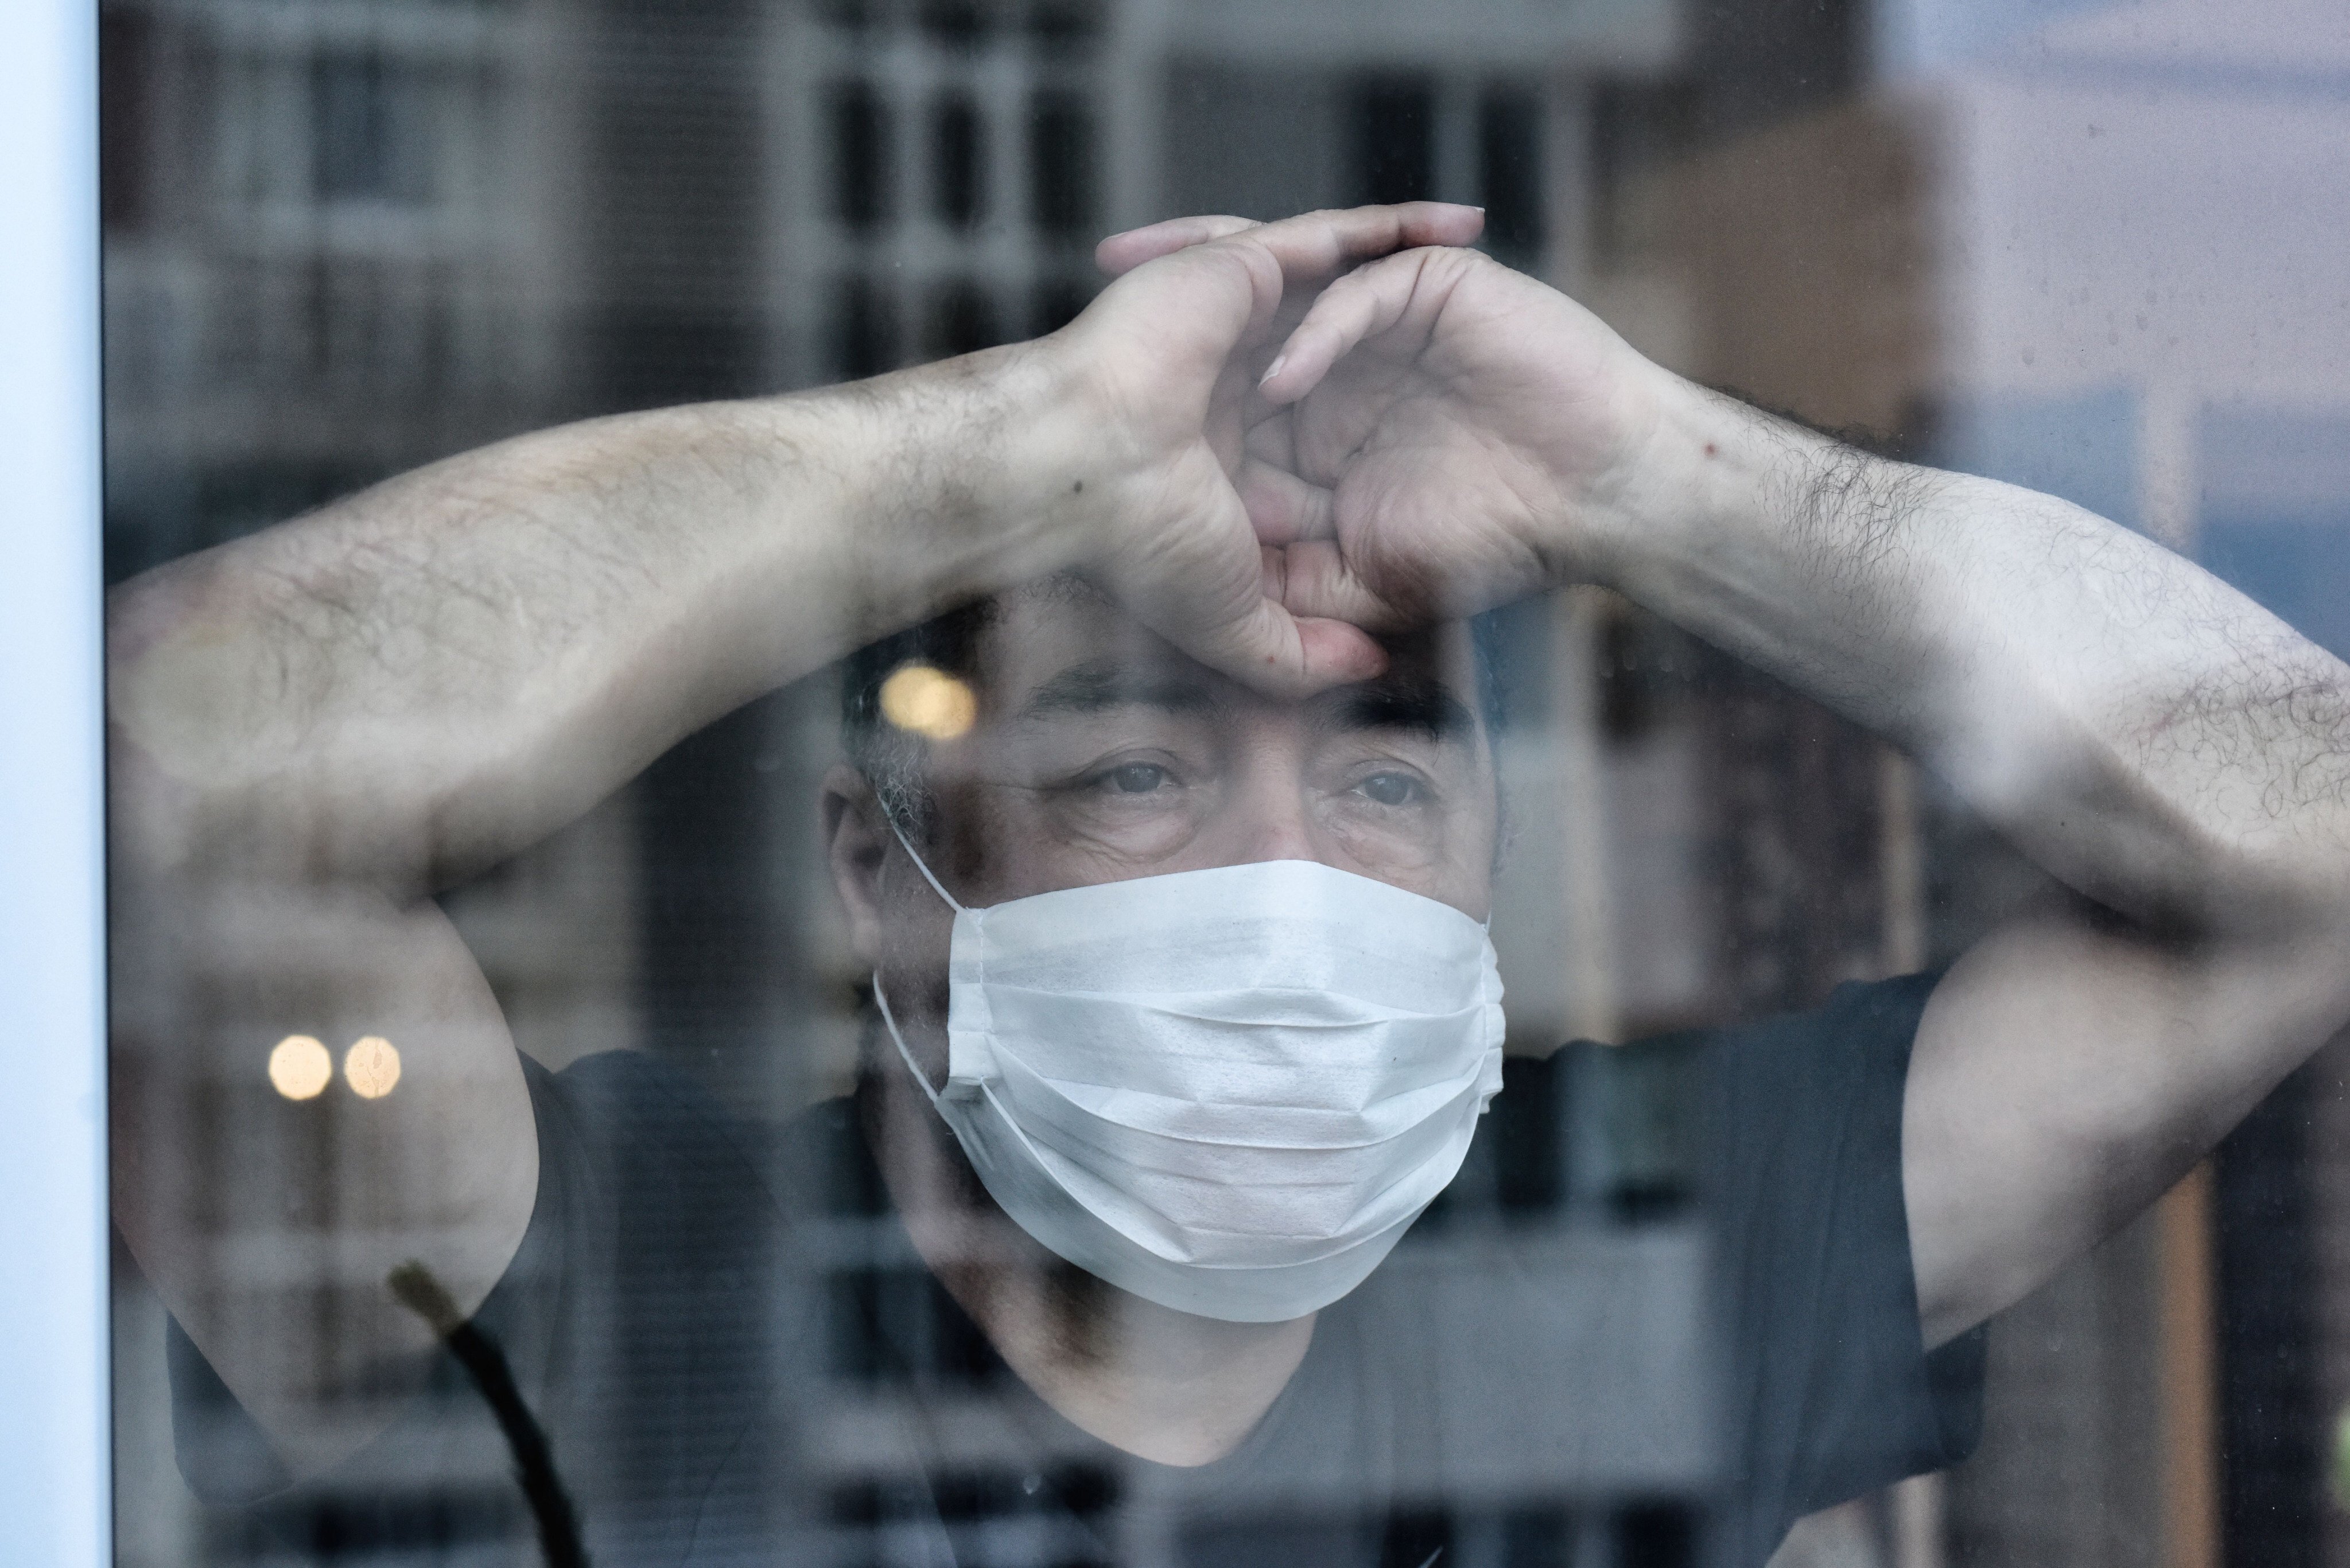 Quarantine at home is a relatively new concept, but one that will become increasingly common. Photo: Getty Images